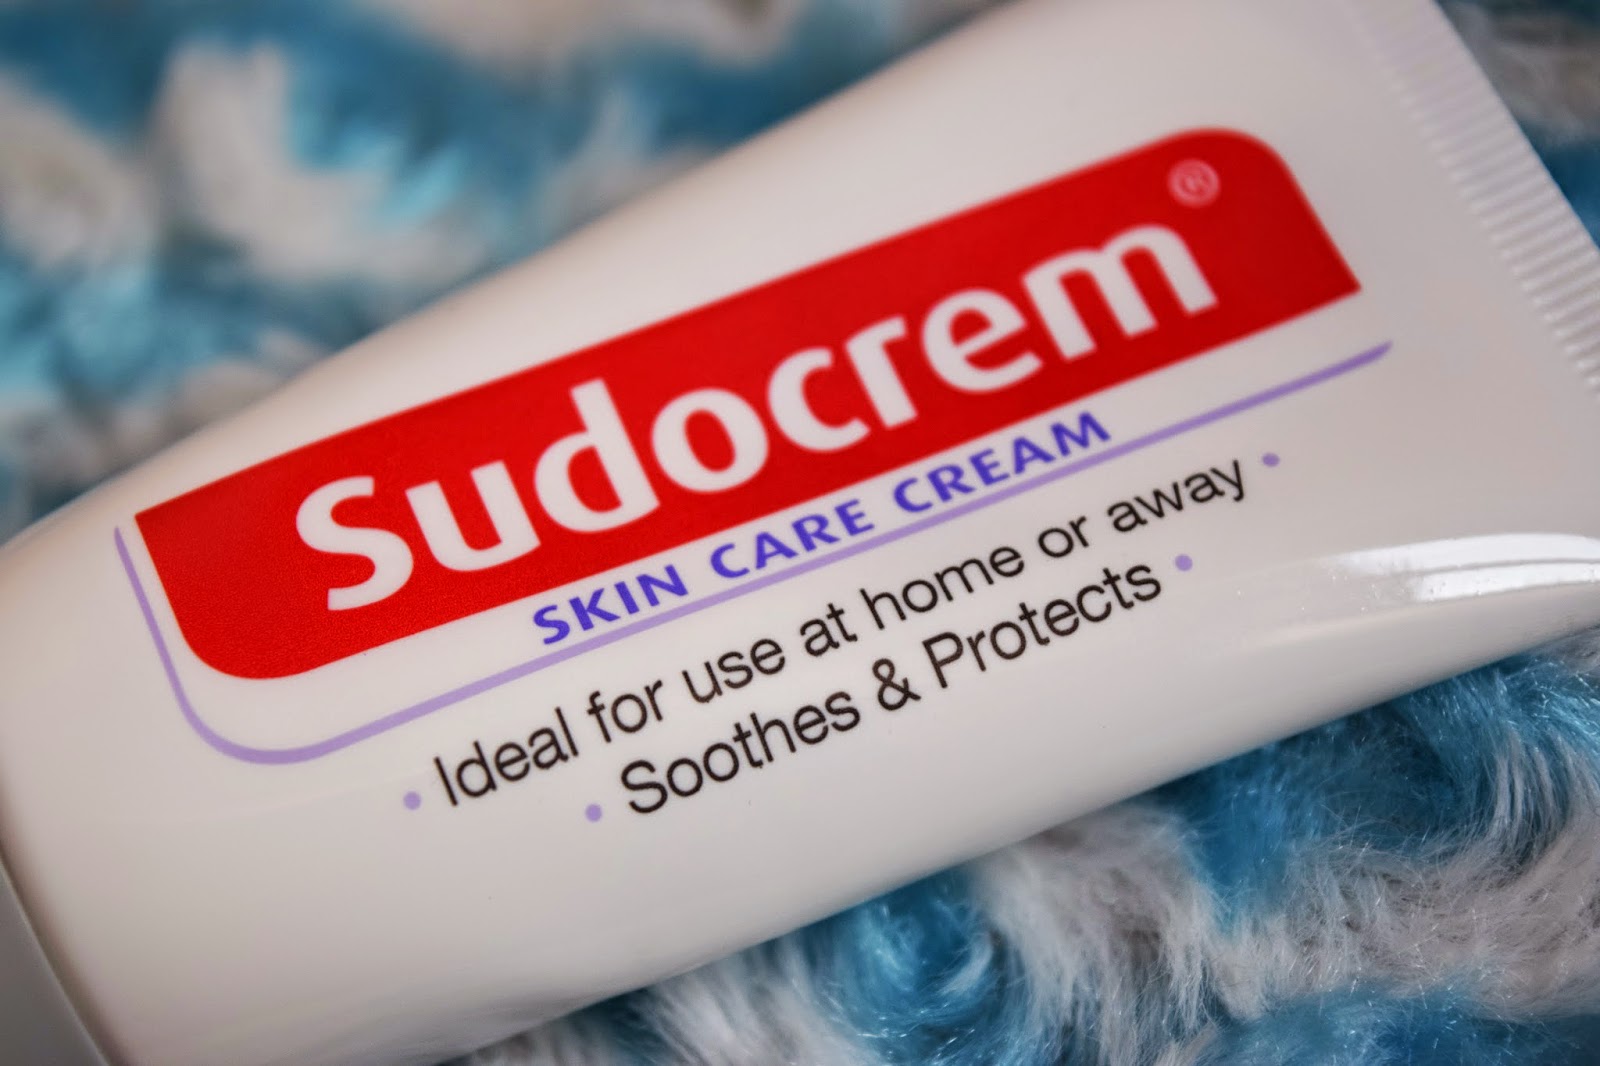 a close up shot of the logo on the tube of Sudocrem Skin Care Cream